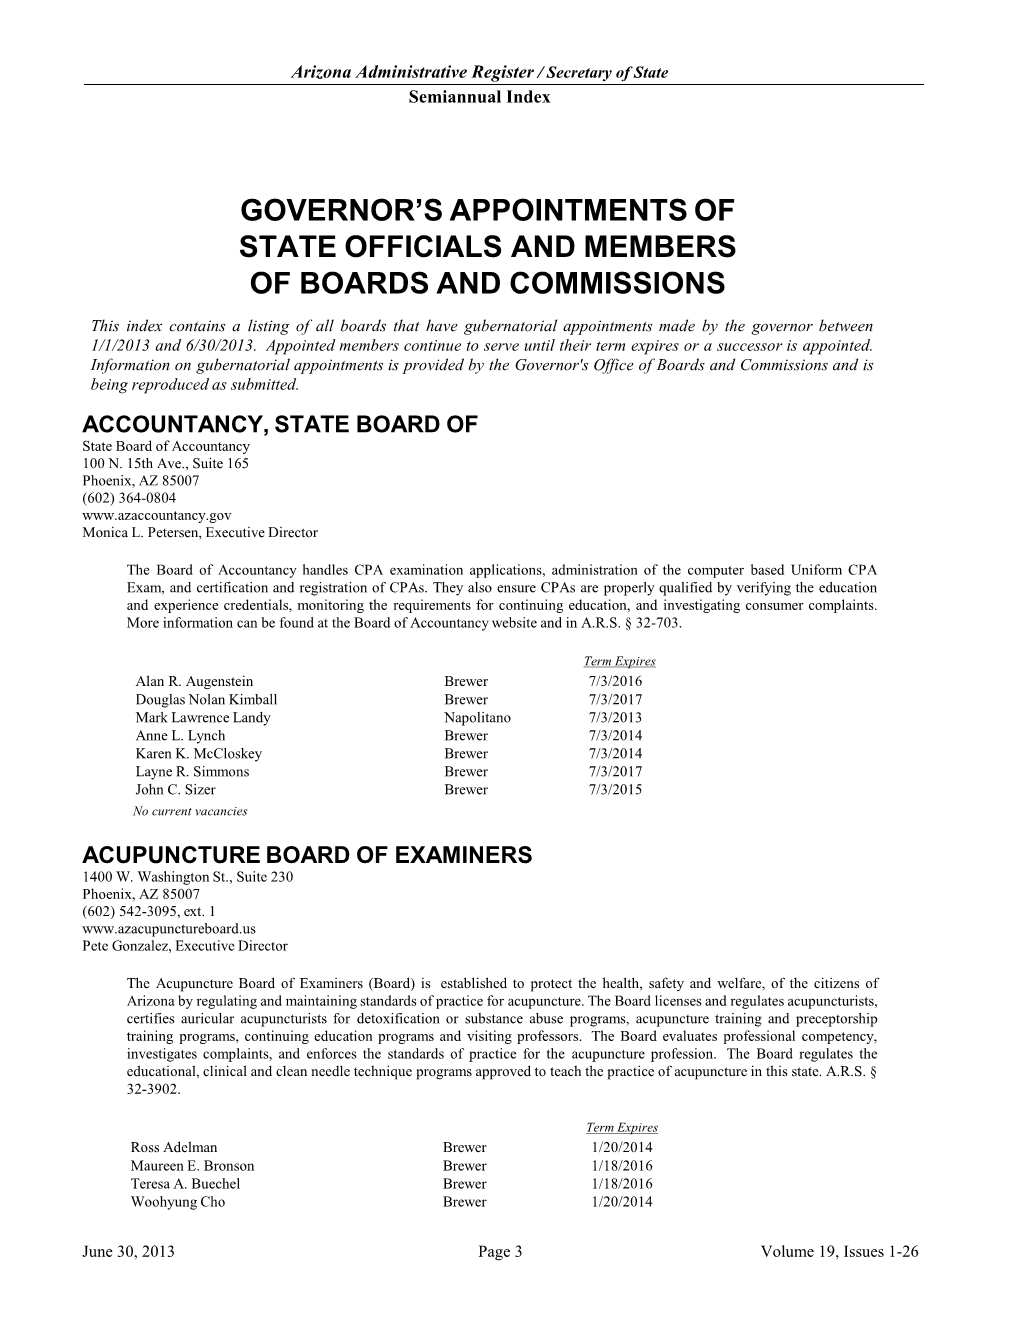 Governor's Appointments of State Officials and Members